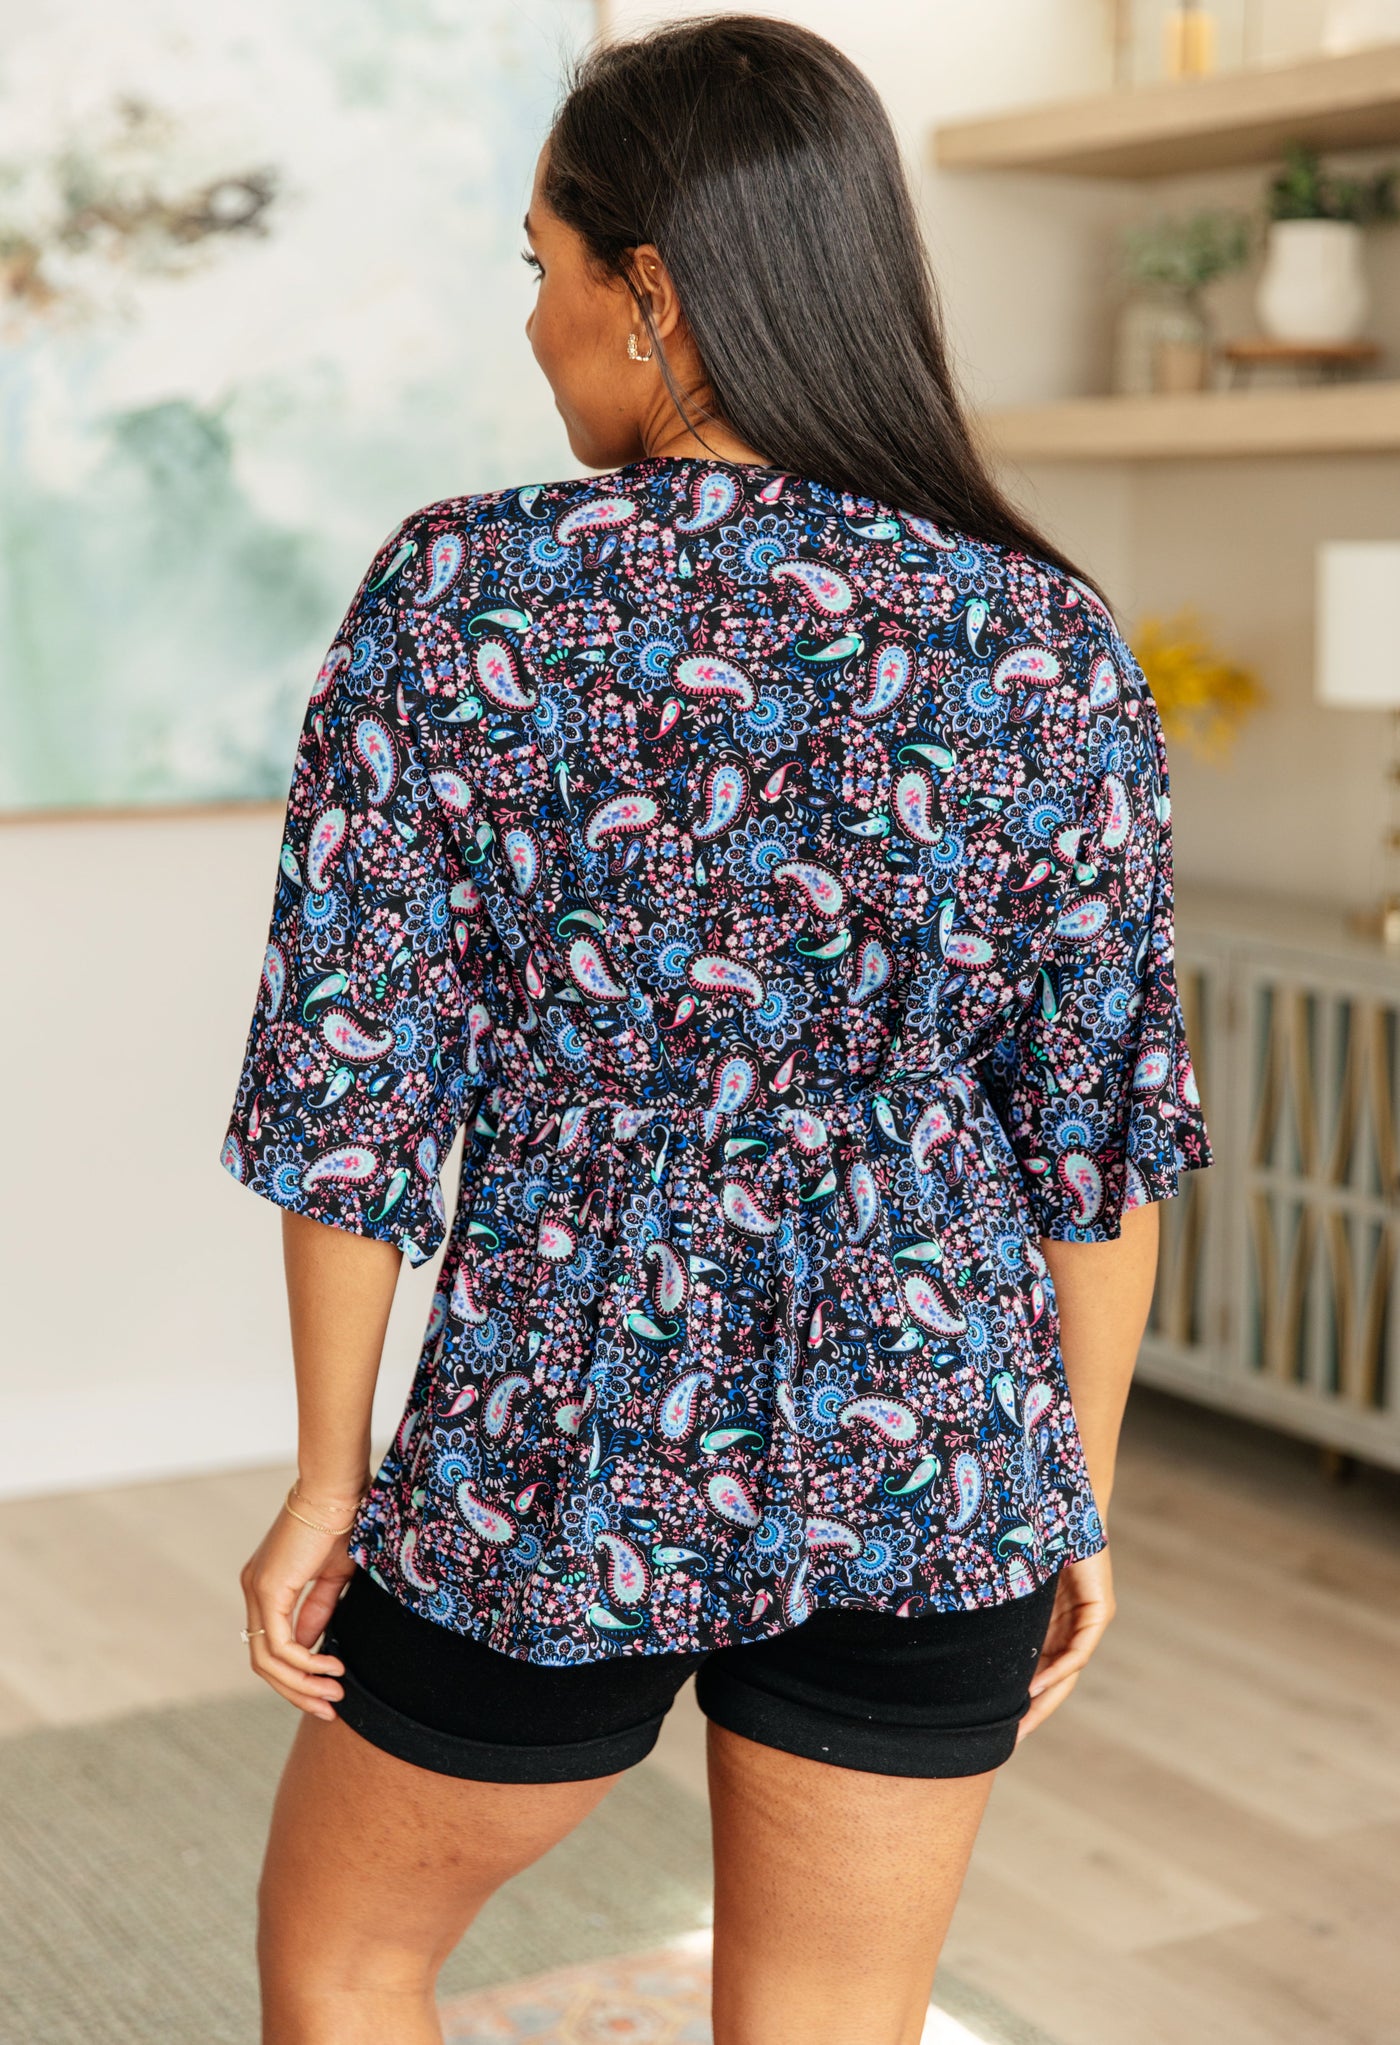 Dreamer Top in Black and Periwinkle Paisley Southern Soul Collectives